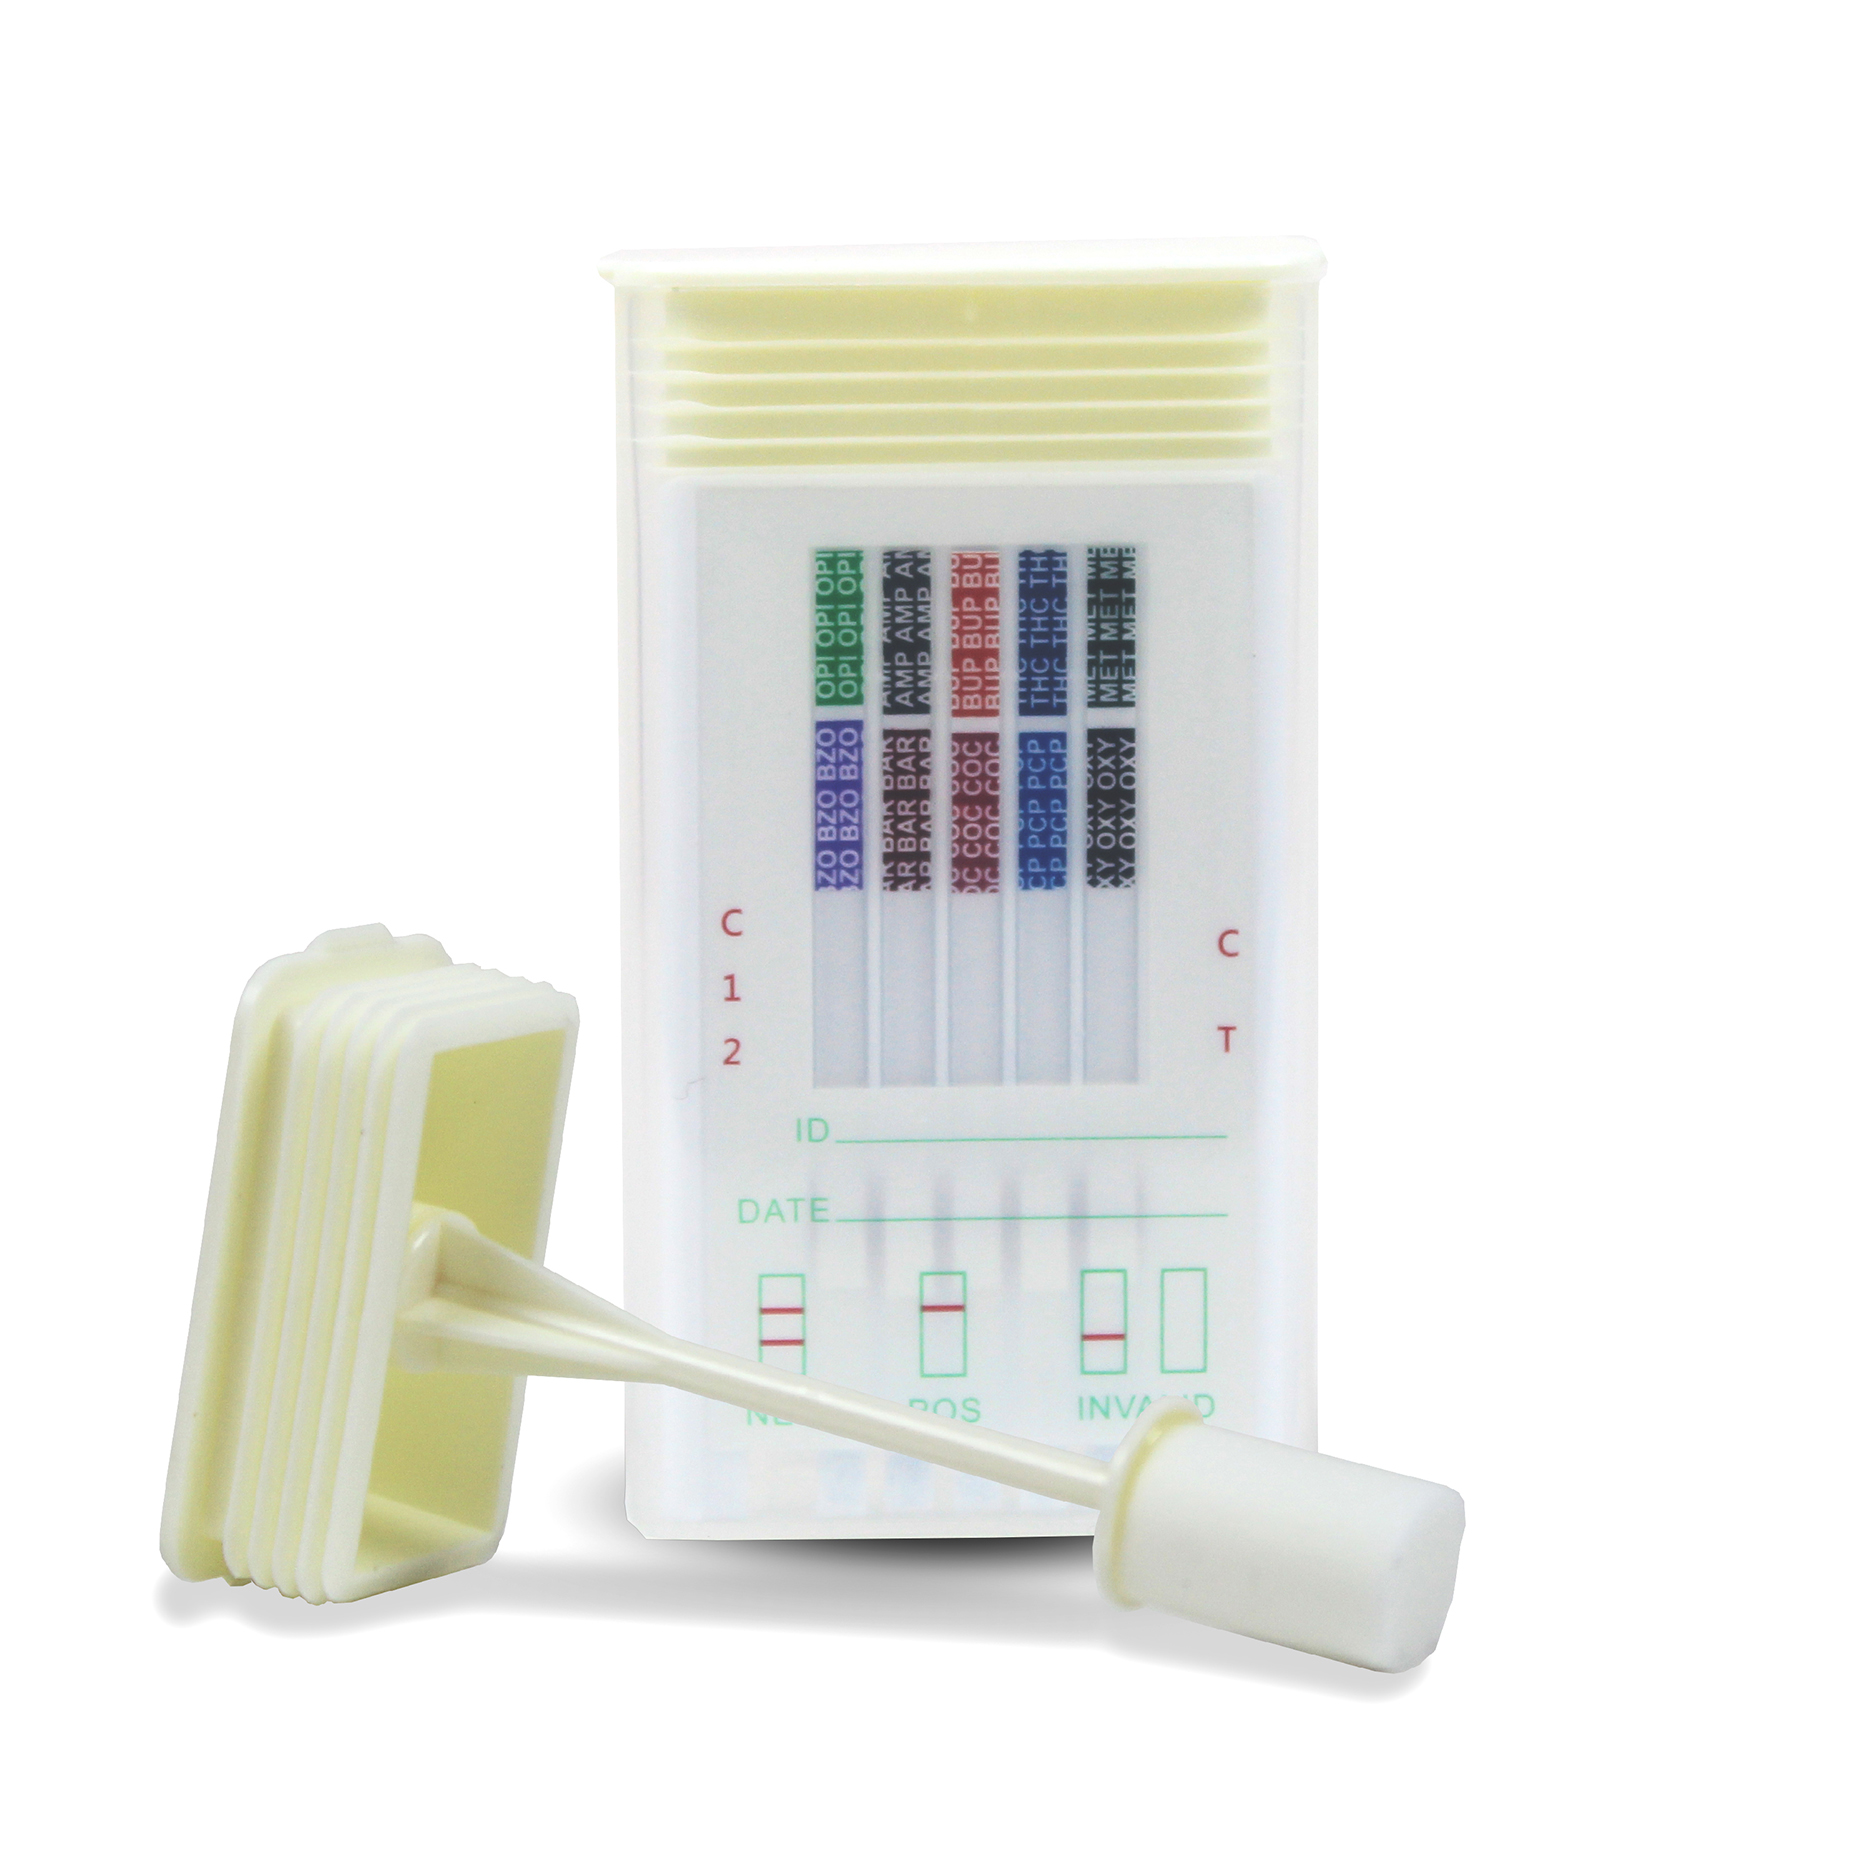 Discover One-Step - 10 Panel Saliva <span style='font-size:11px; color:#7d7d7d;'><br>AMP, OPI, THC, COC, PCP, OXY, BZO, BAR, MAMP, BUP</span>